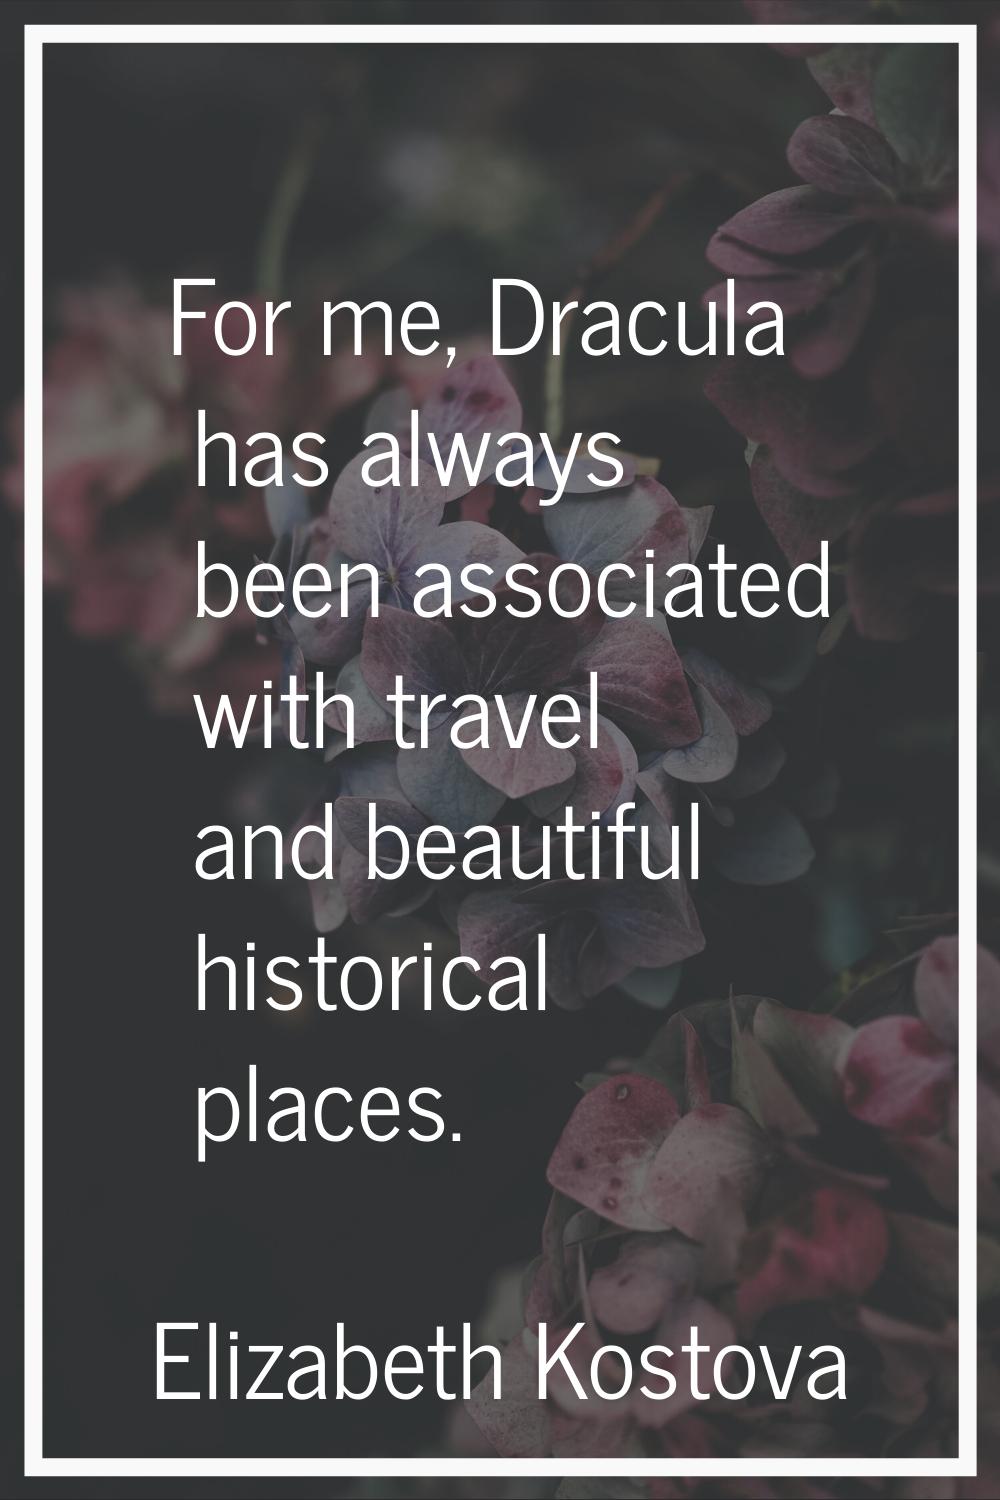 For me, Dracula has always been associated with travel and beautiful historical places.